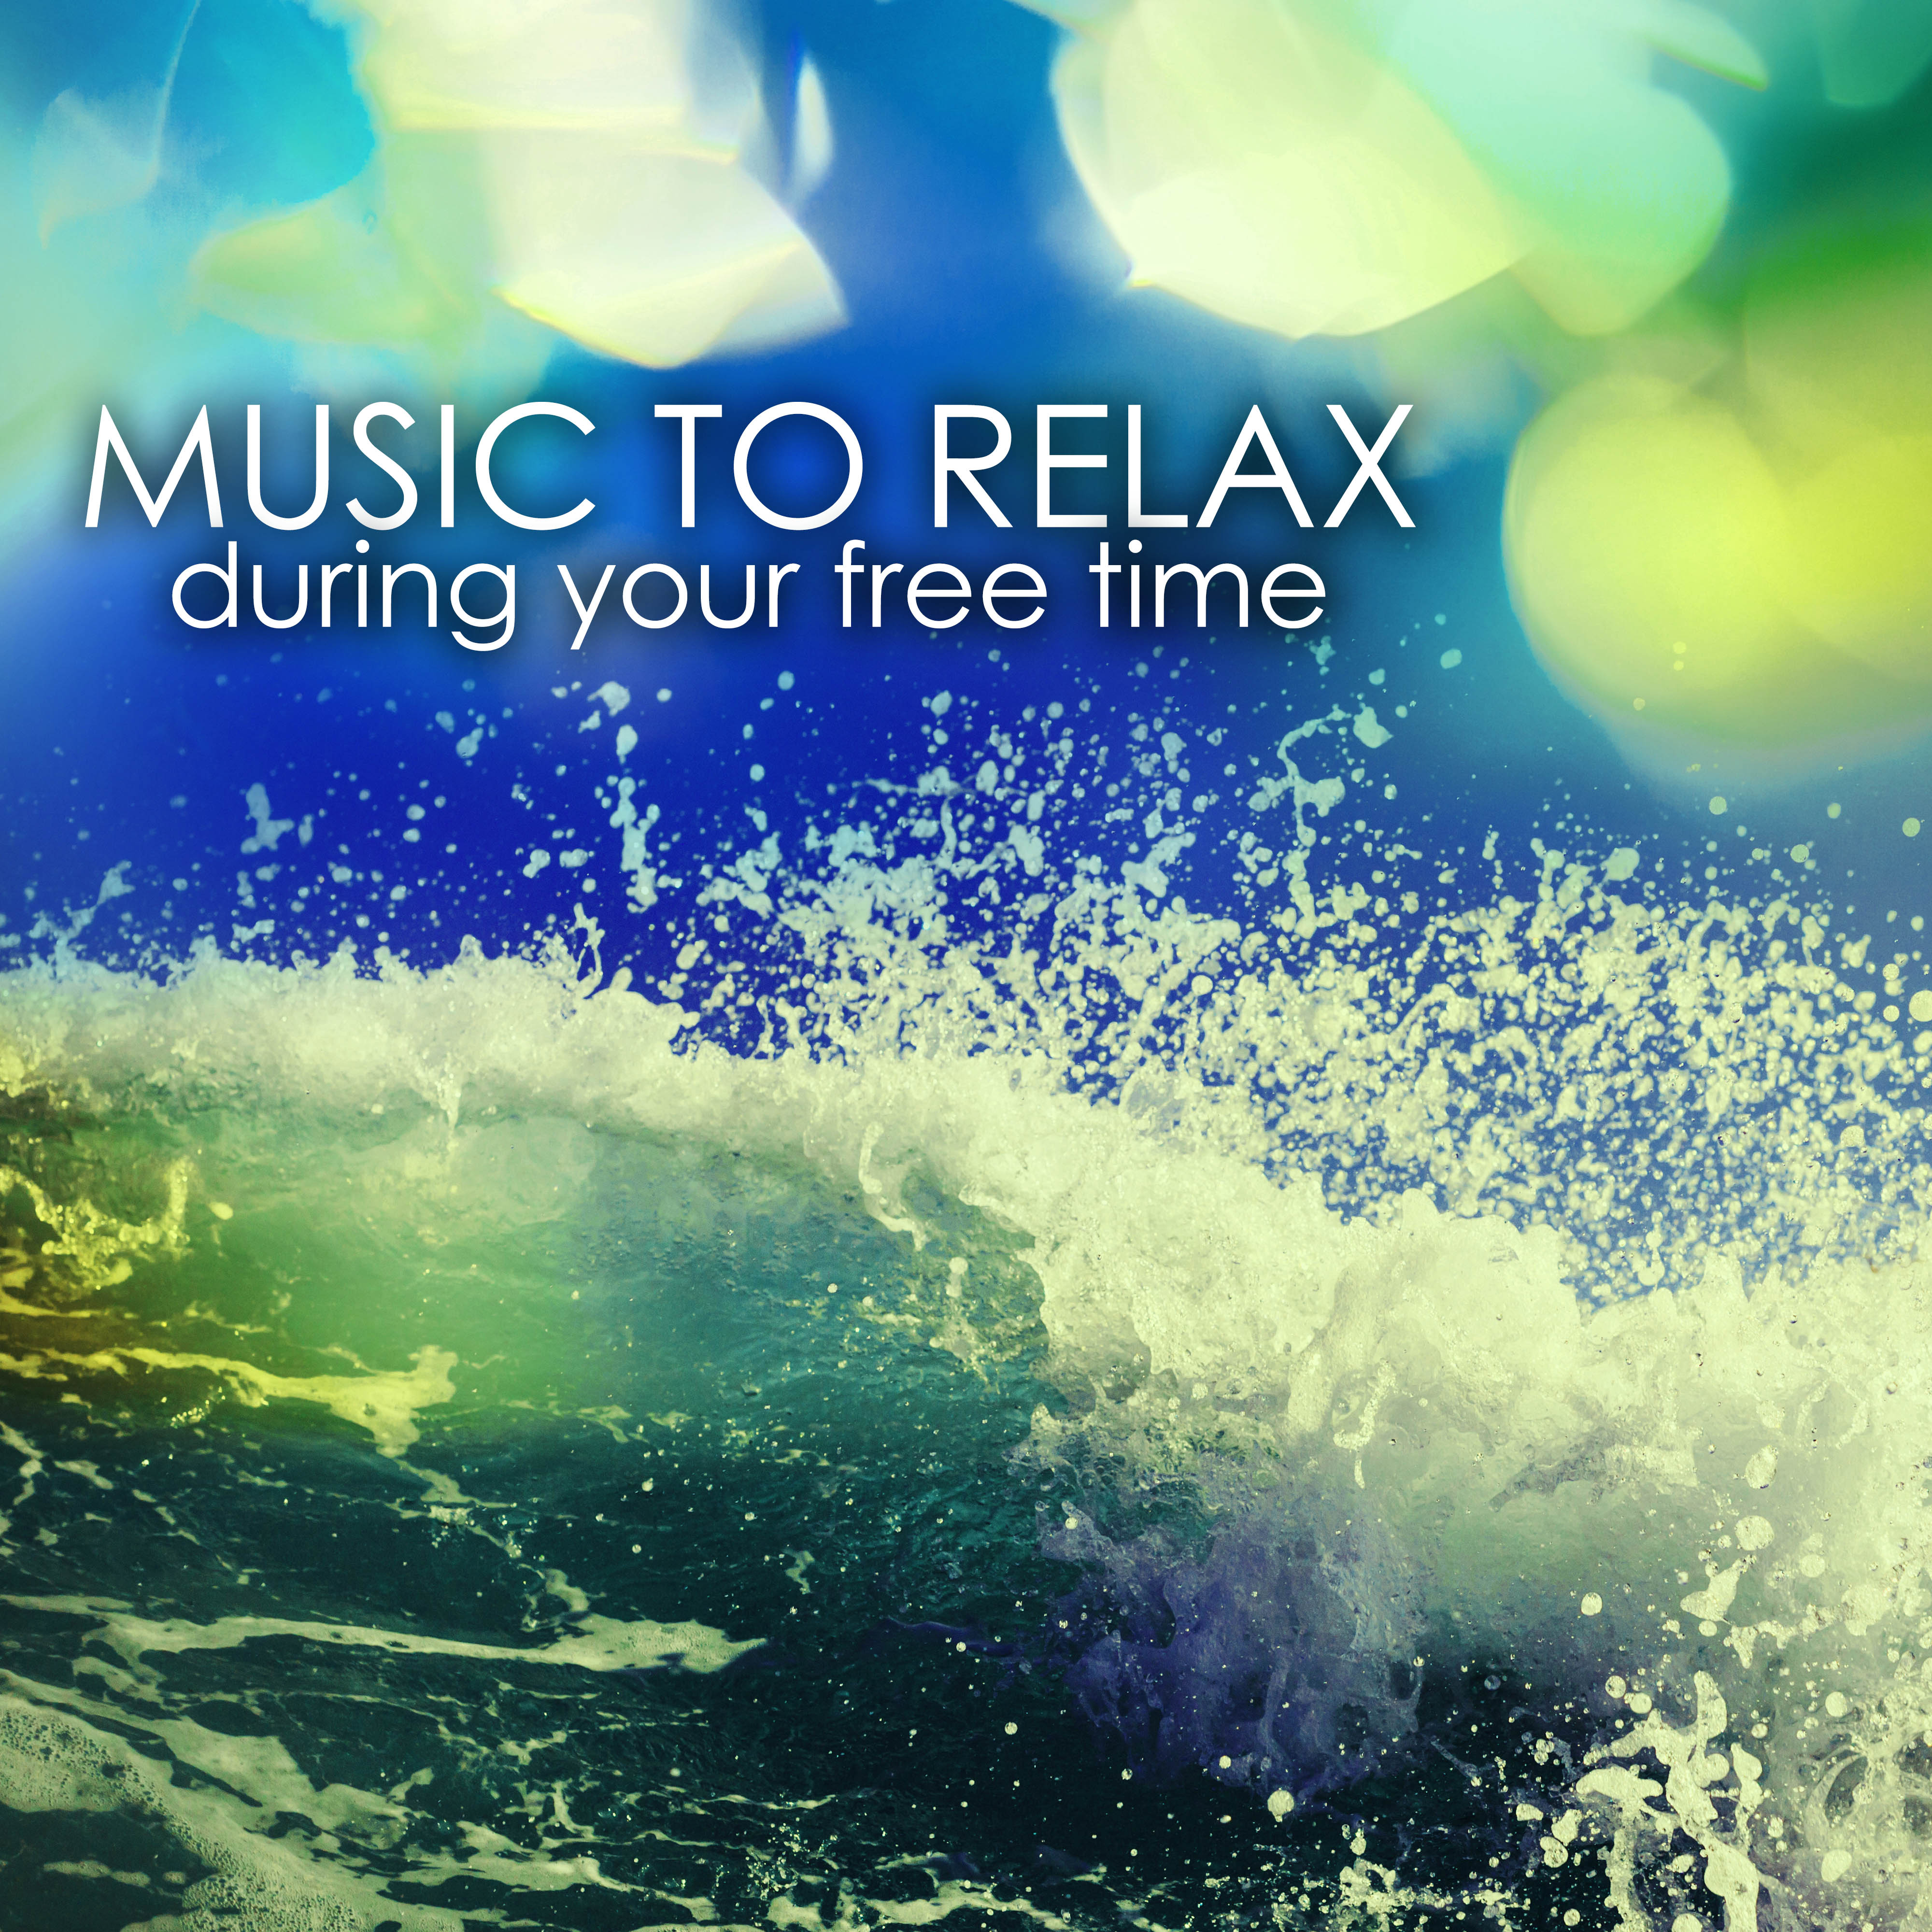 Mind & Soul - Relaxing Songs for Mindfulness Meditation & Yoga Exercises, Guided Imagery Music, Asian Zen Spa